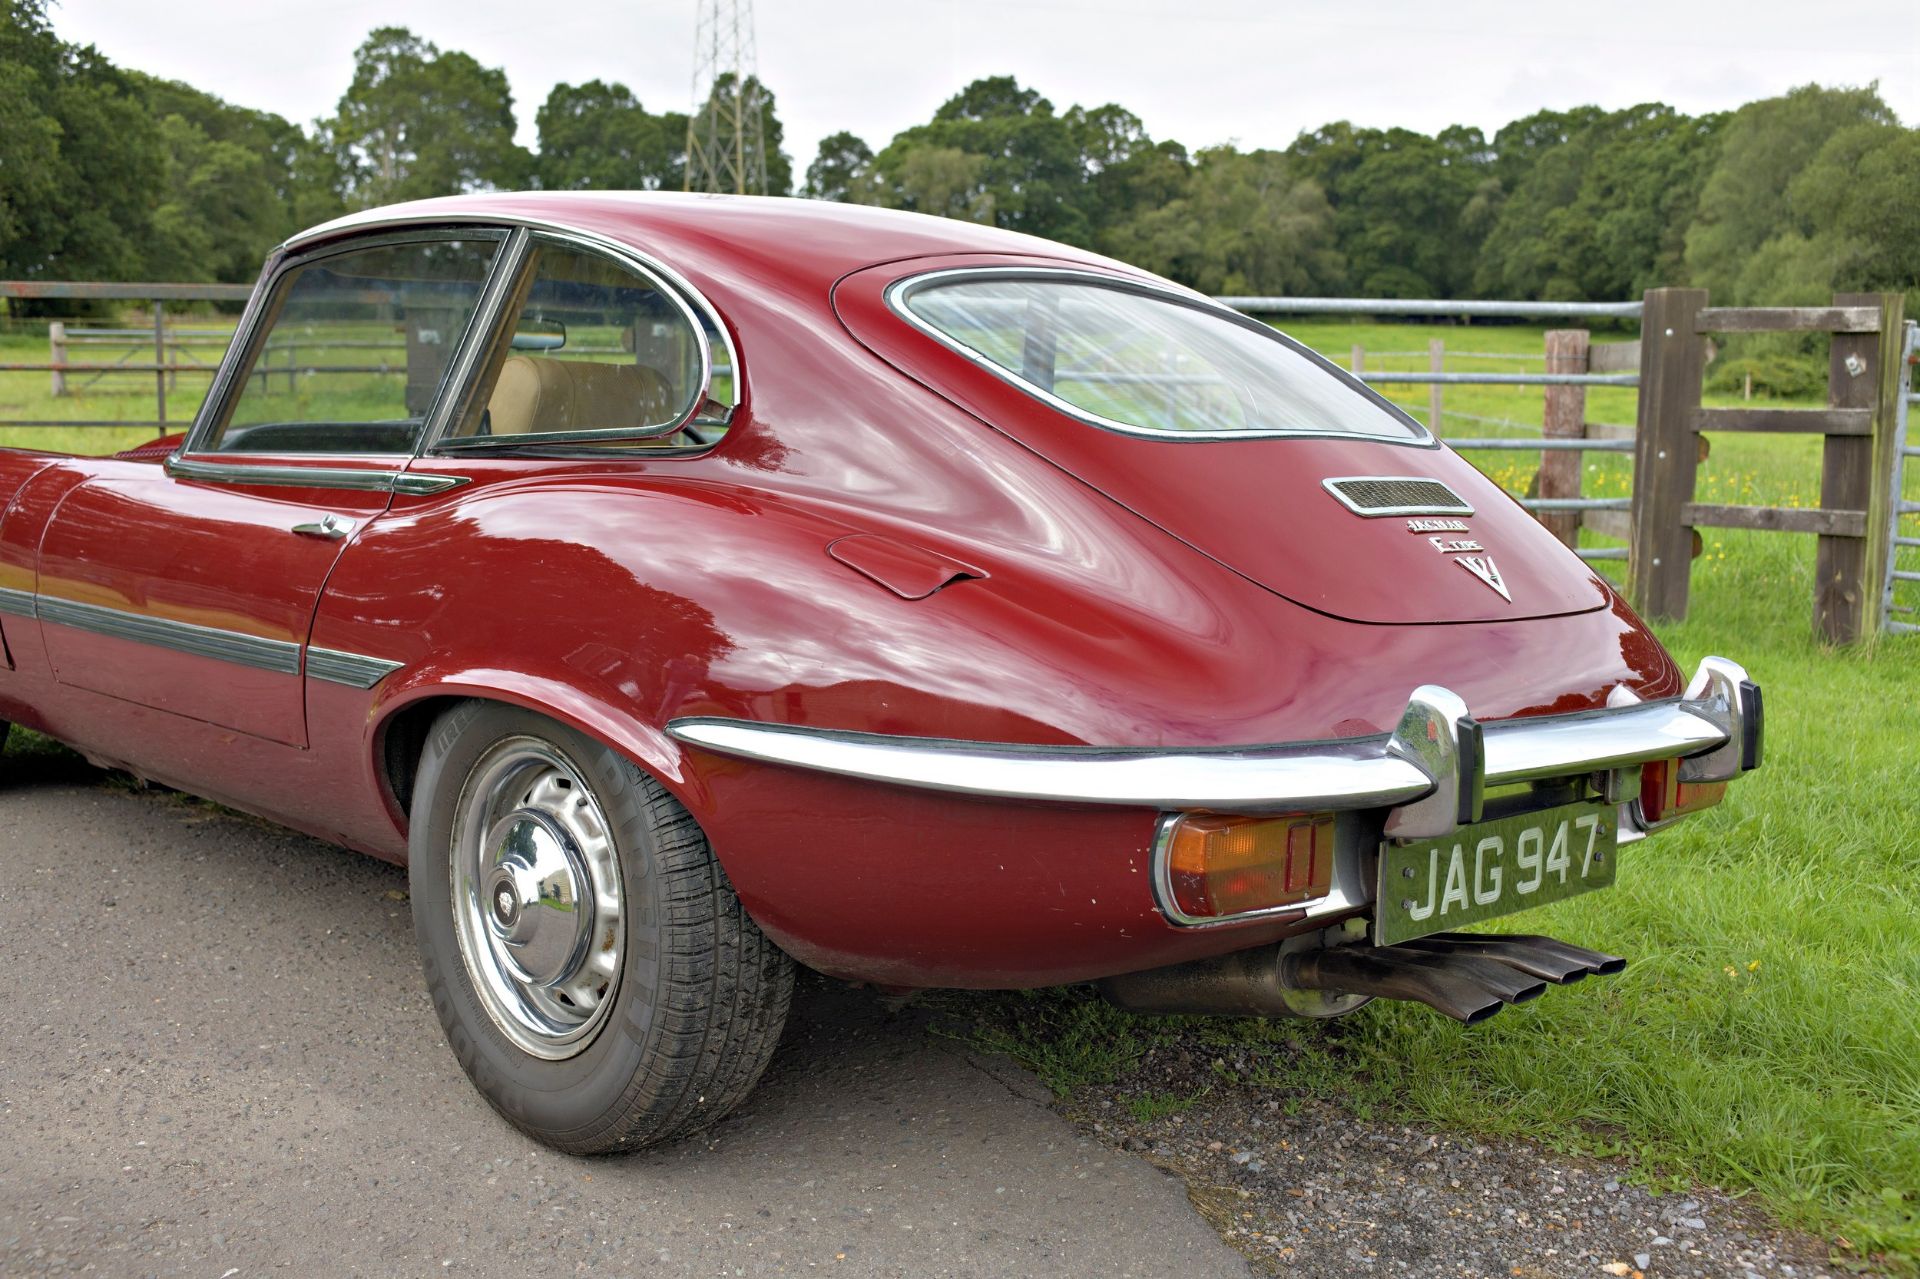 1972 JAGUAR E-TYPE SERIES III FIXED HEAD COUPE Registration: JAG 947 - Image 8 of 36